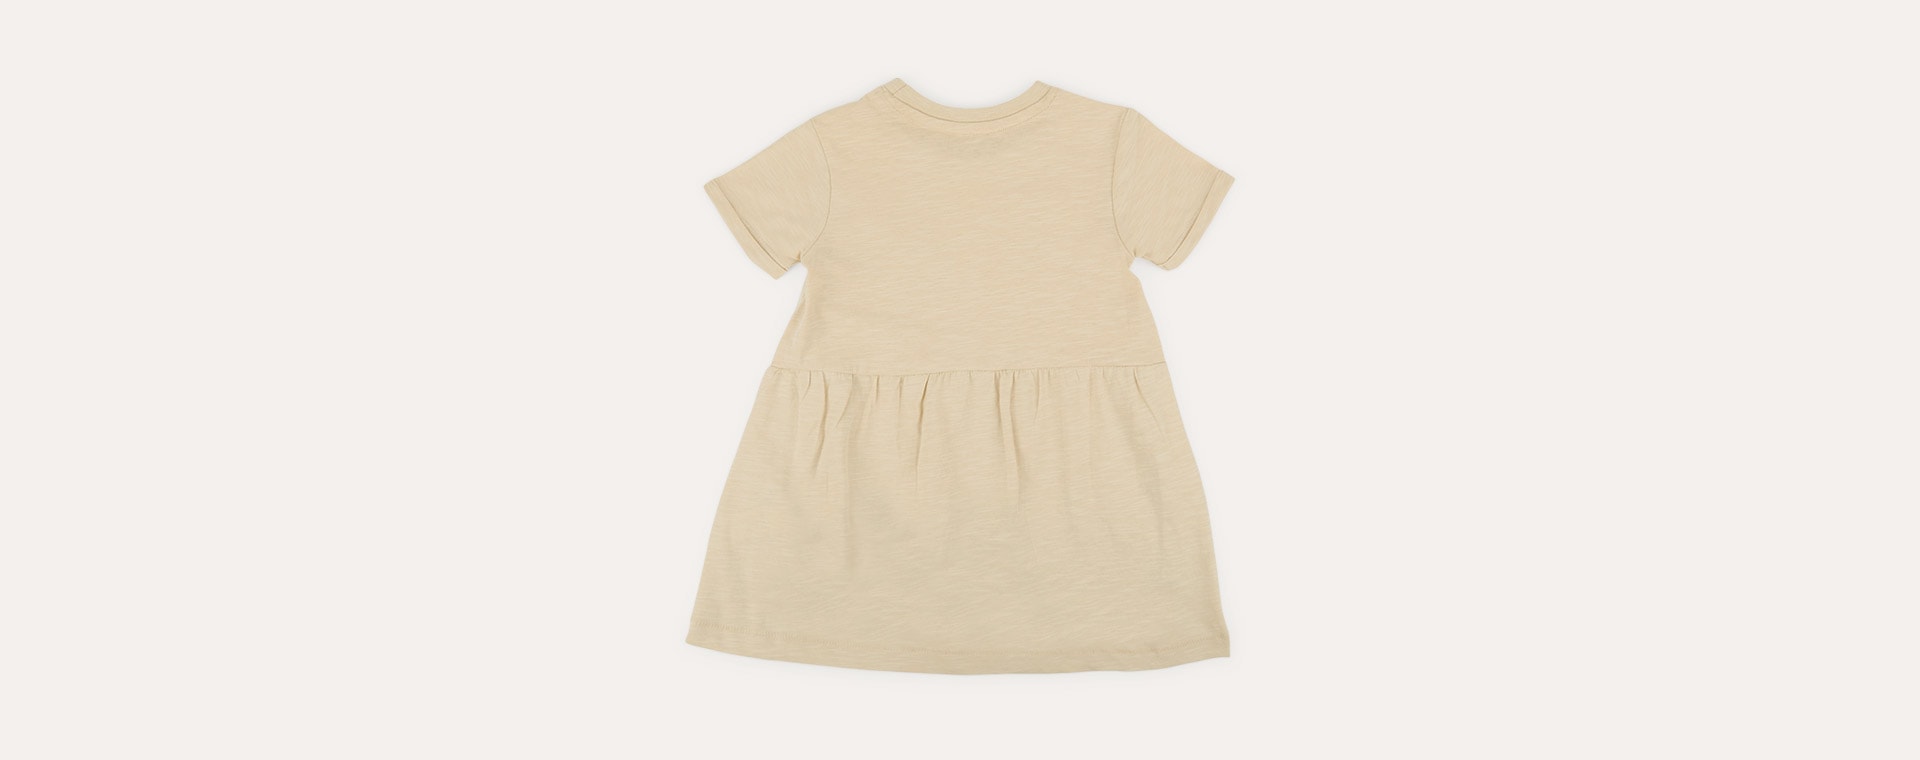 Buttermilk KIDLY Label Perfect Tee Dress